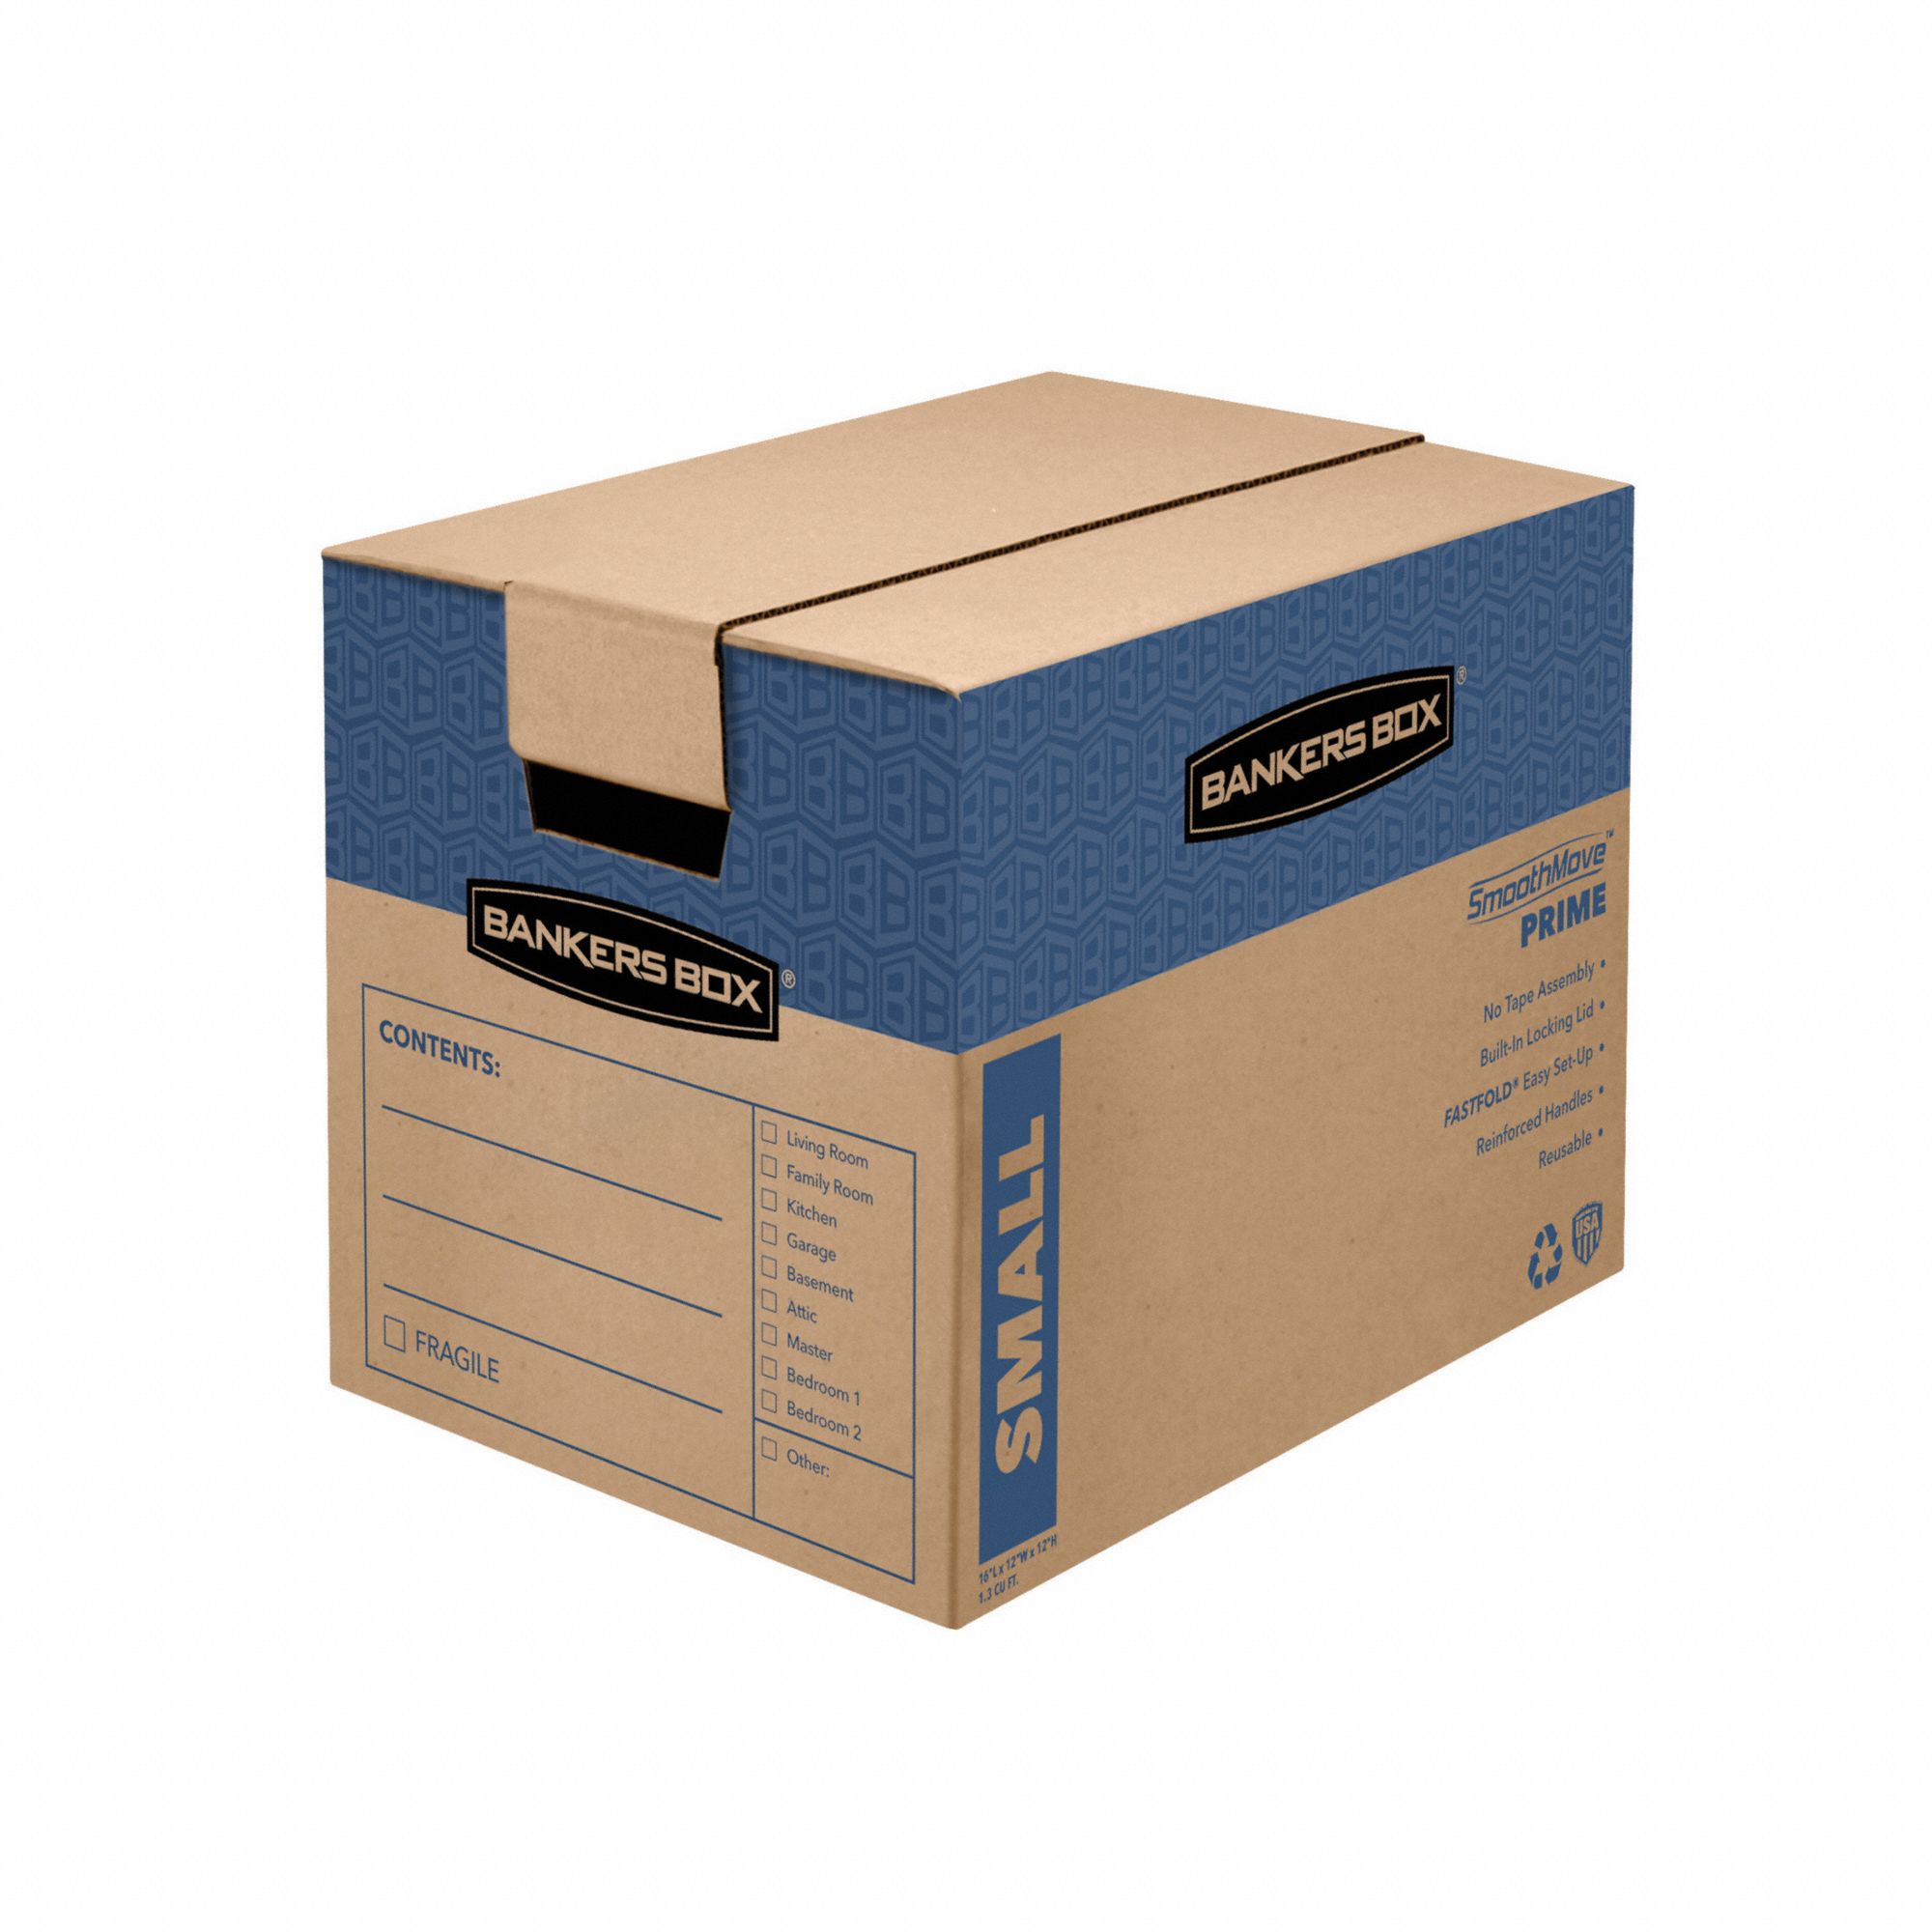 Moving Box: 16x12x12 in, 32 ECT, Double Wall, Prime, Lid Closure, 10 PK